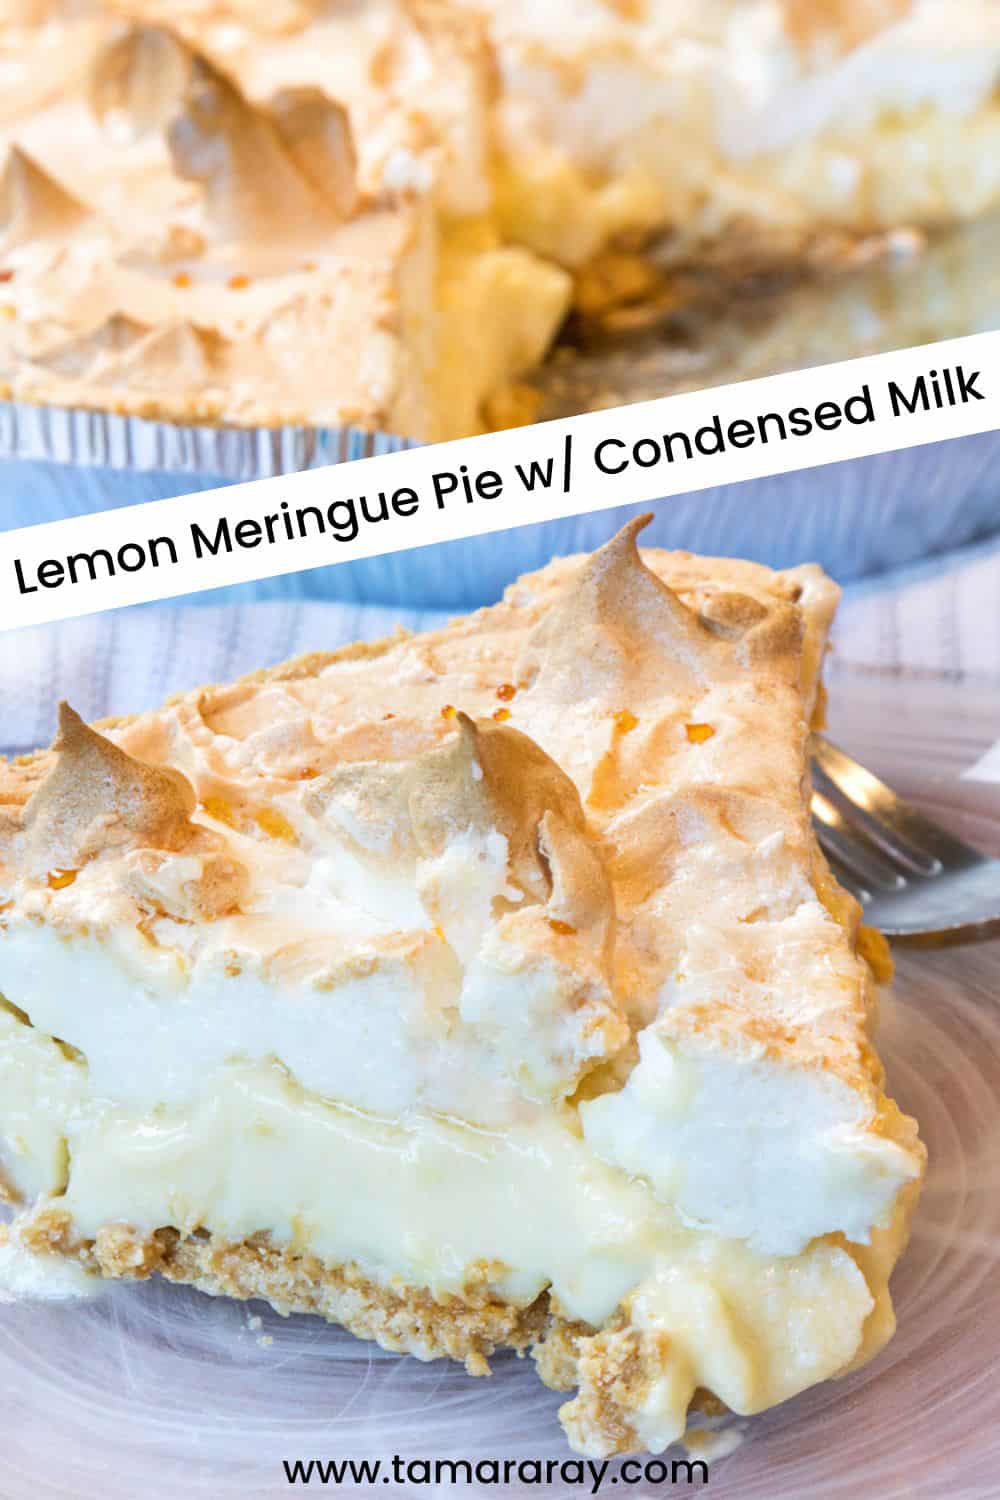 A close-up shot of a slice of lemon meringue pie with condensed milk on a plate.